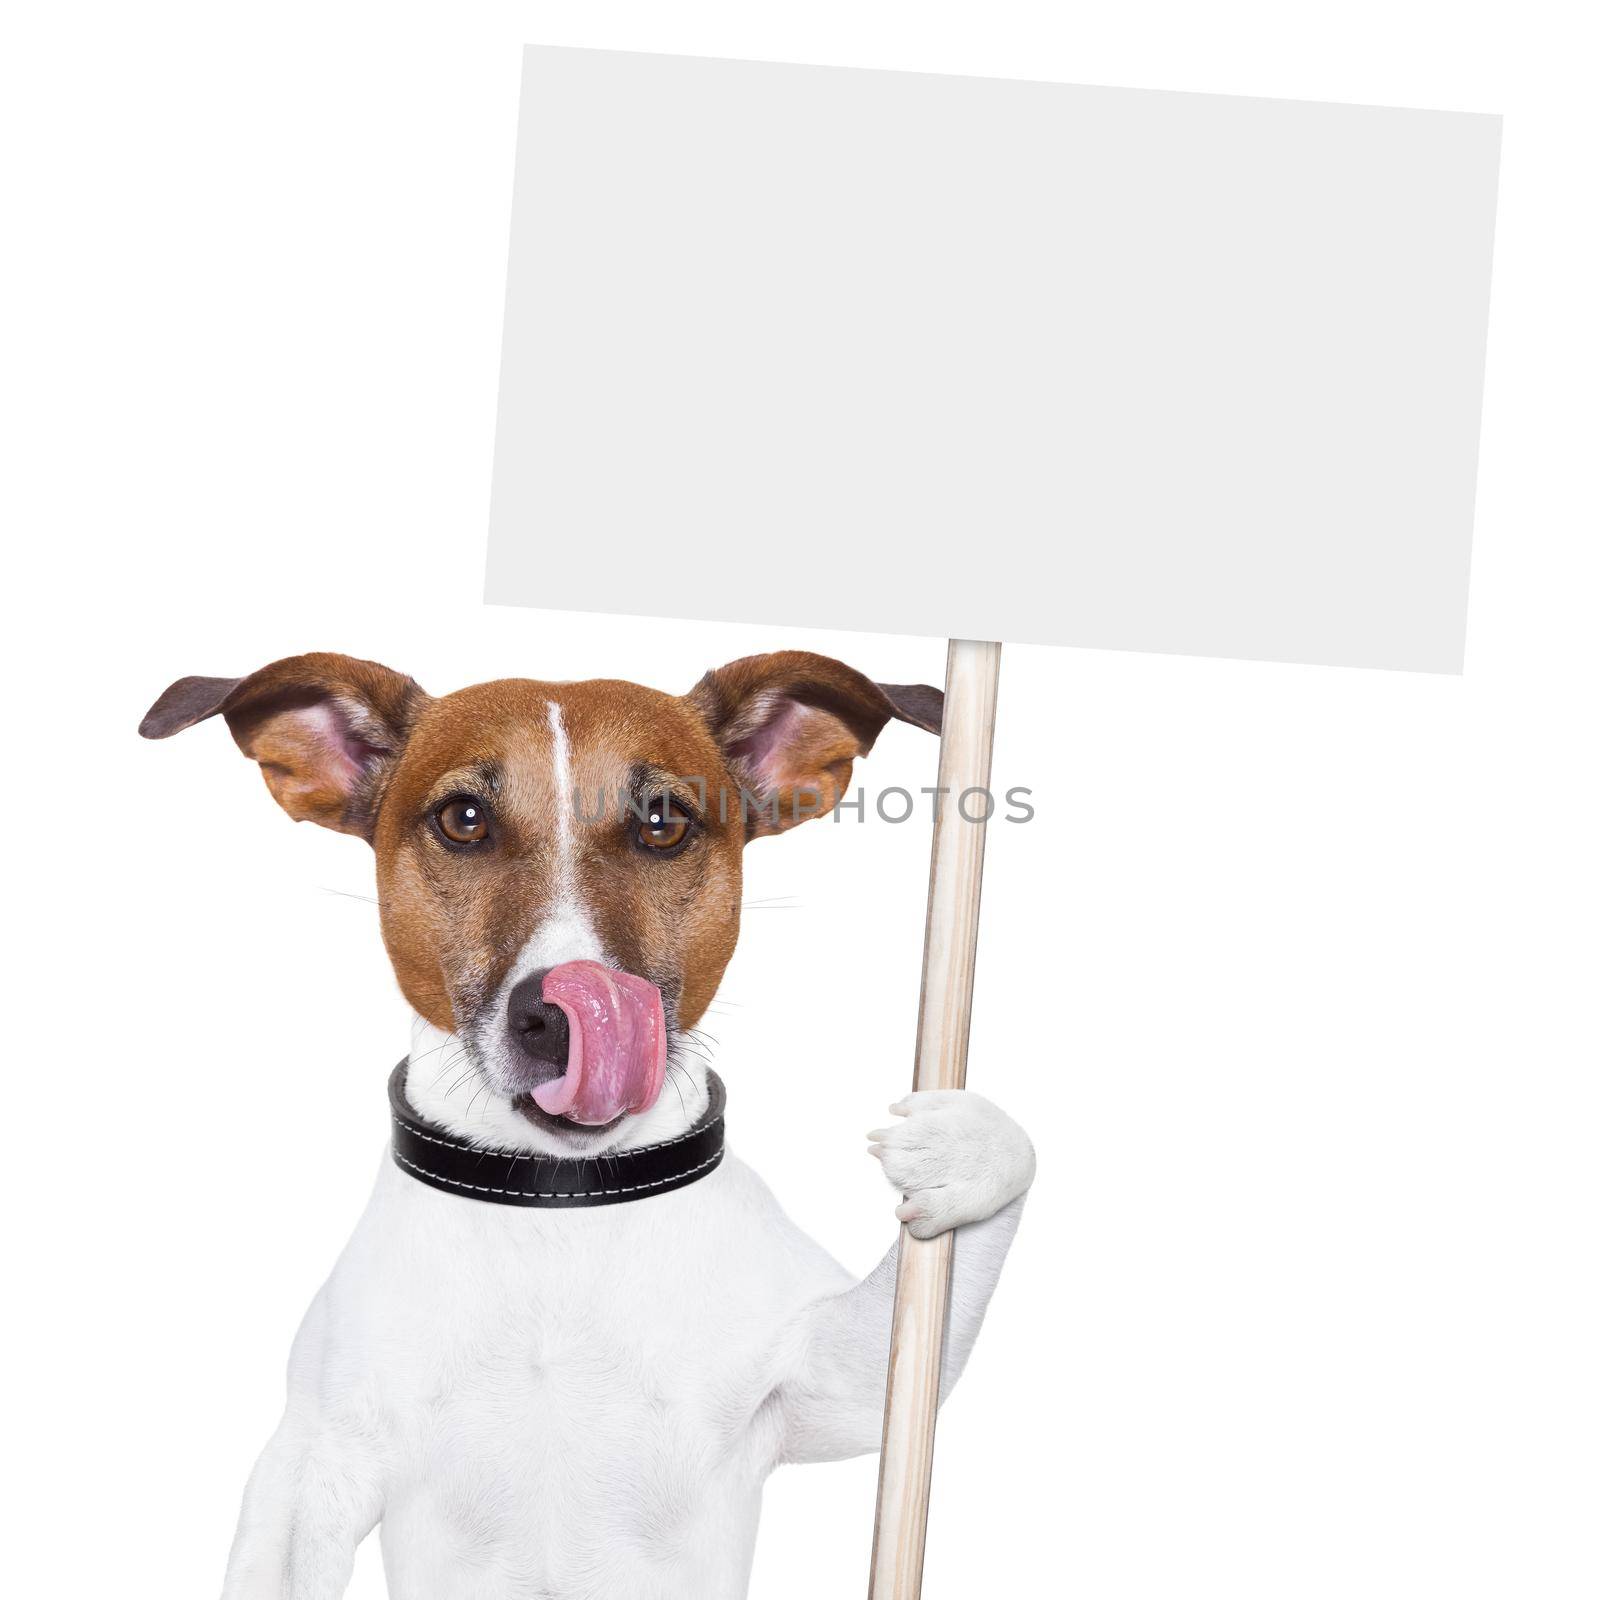 dog holding an empty placard and licking